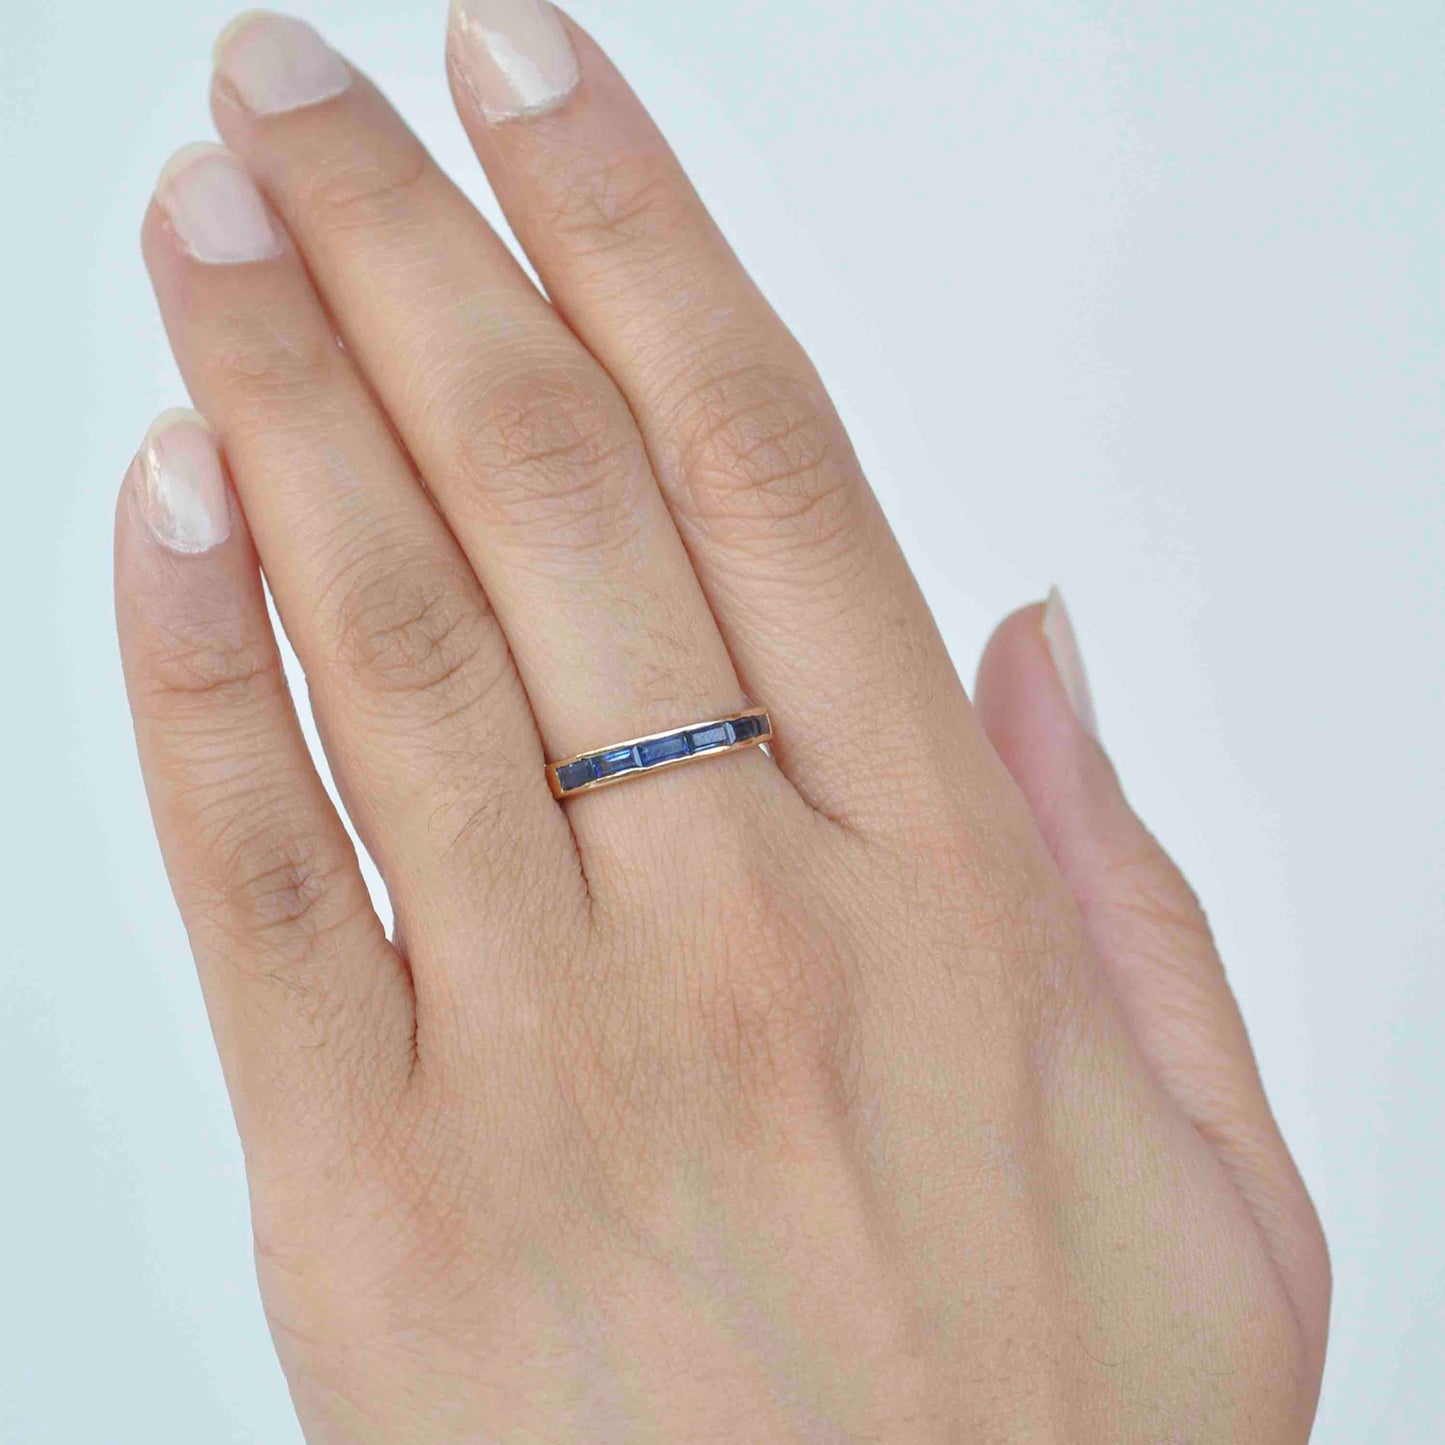 Blue Sapphire Ring Online Store